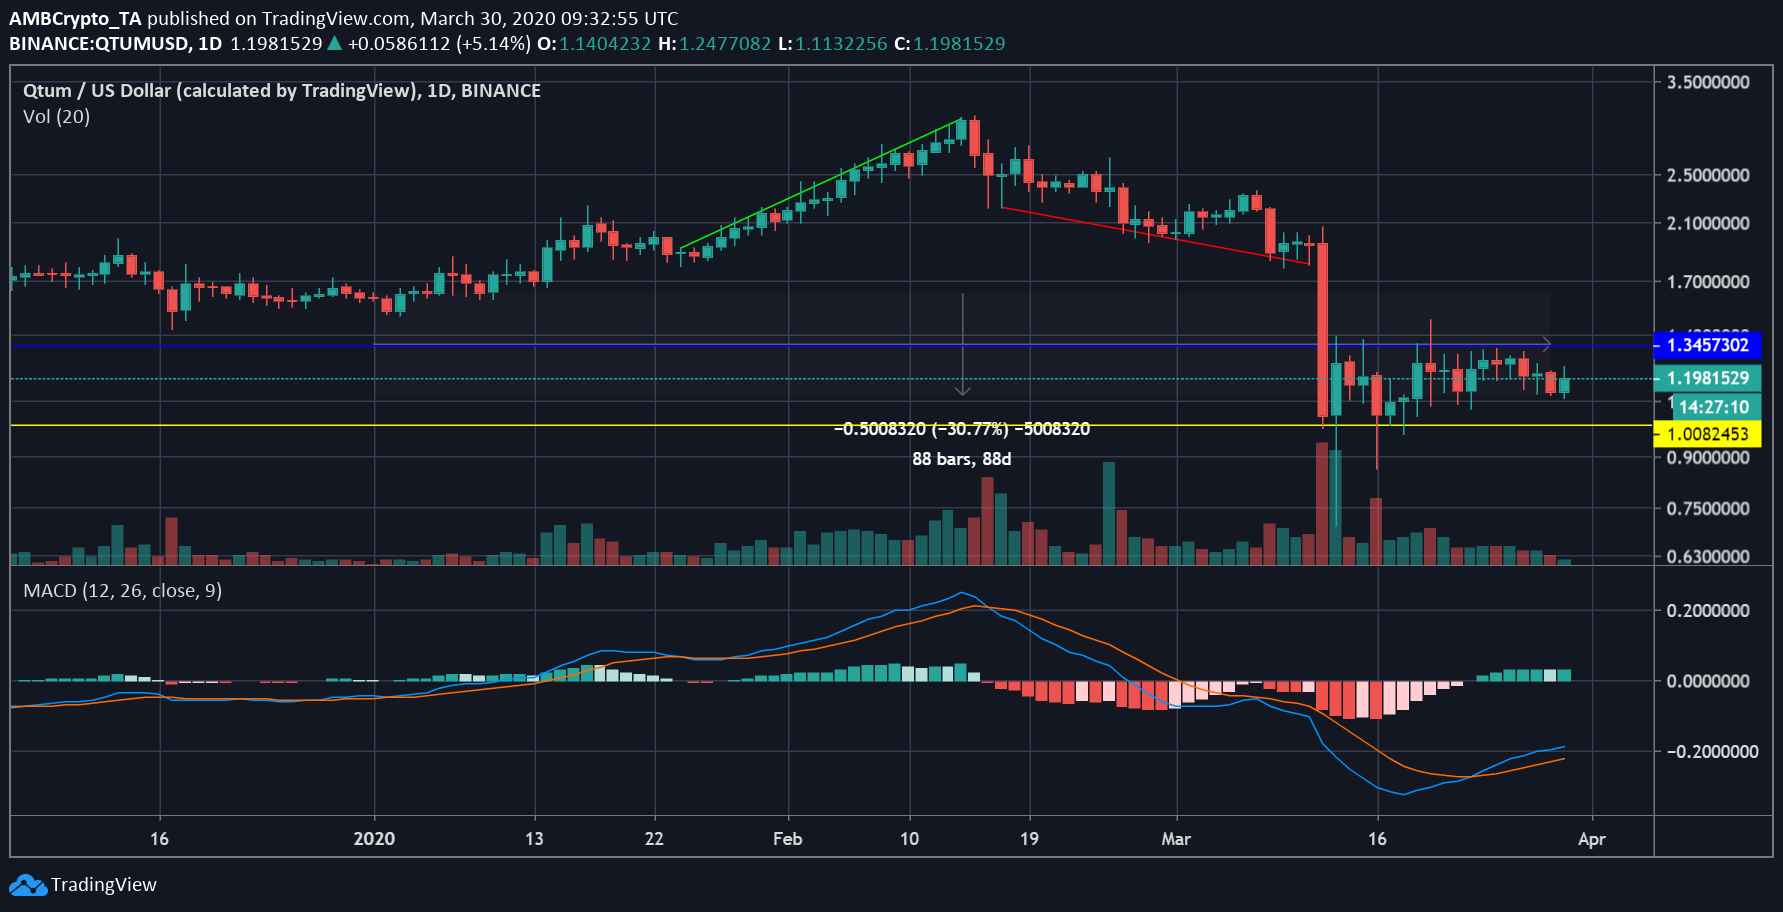 Source: QTUM/USD on Trading View